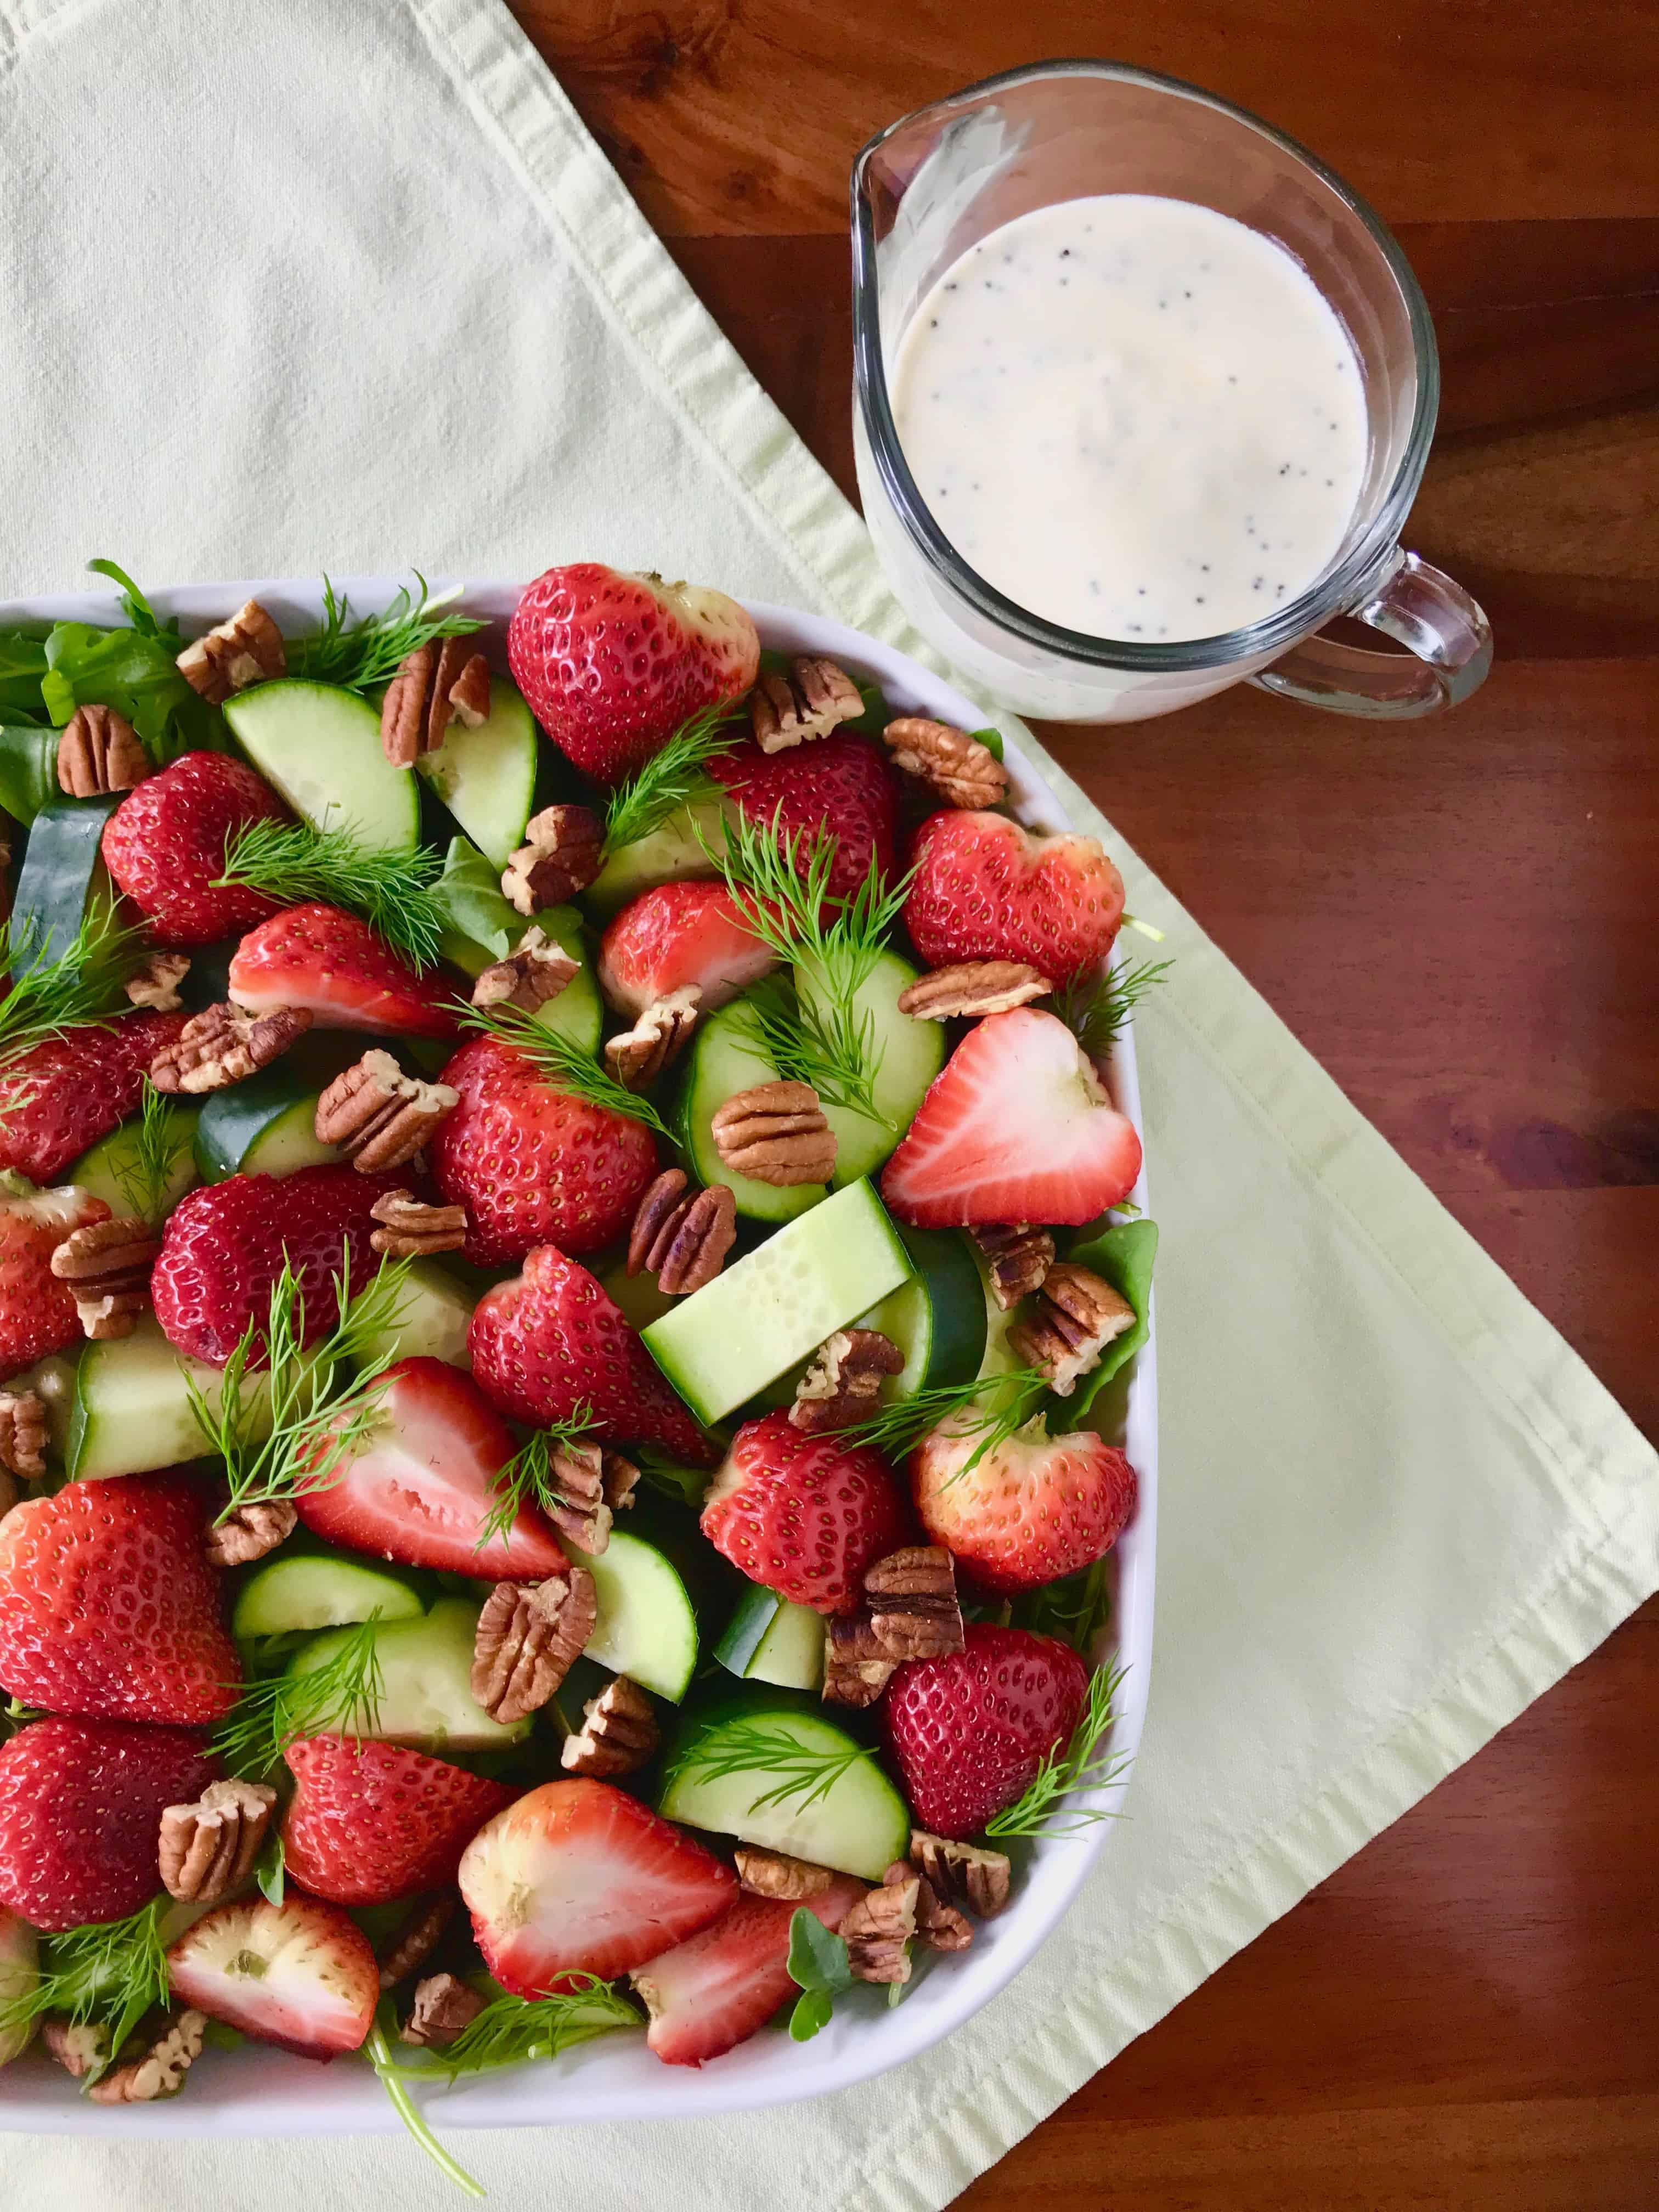 Healthy arugula salad with berries and nuts in a white square bowl next to a glass pitcher filled with a creamy dressing.